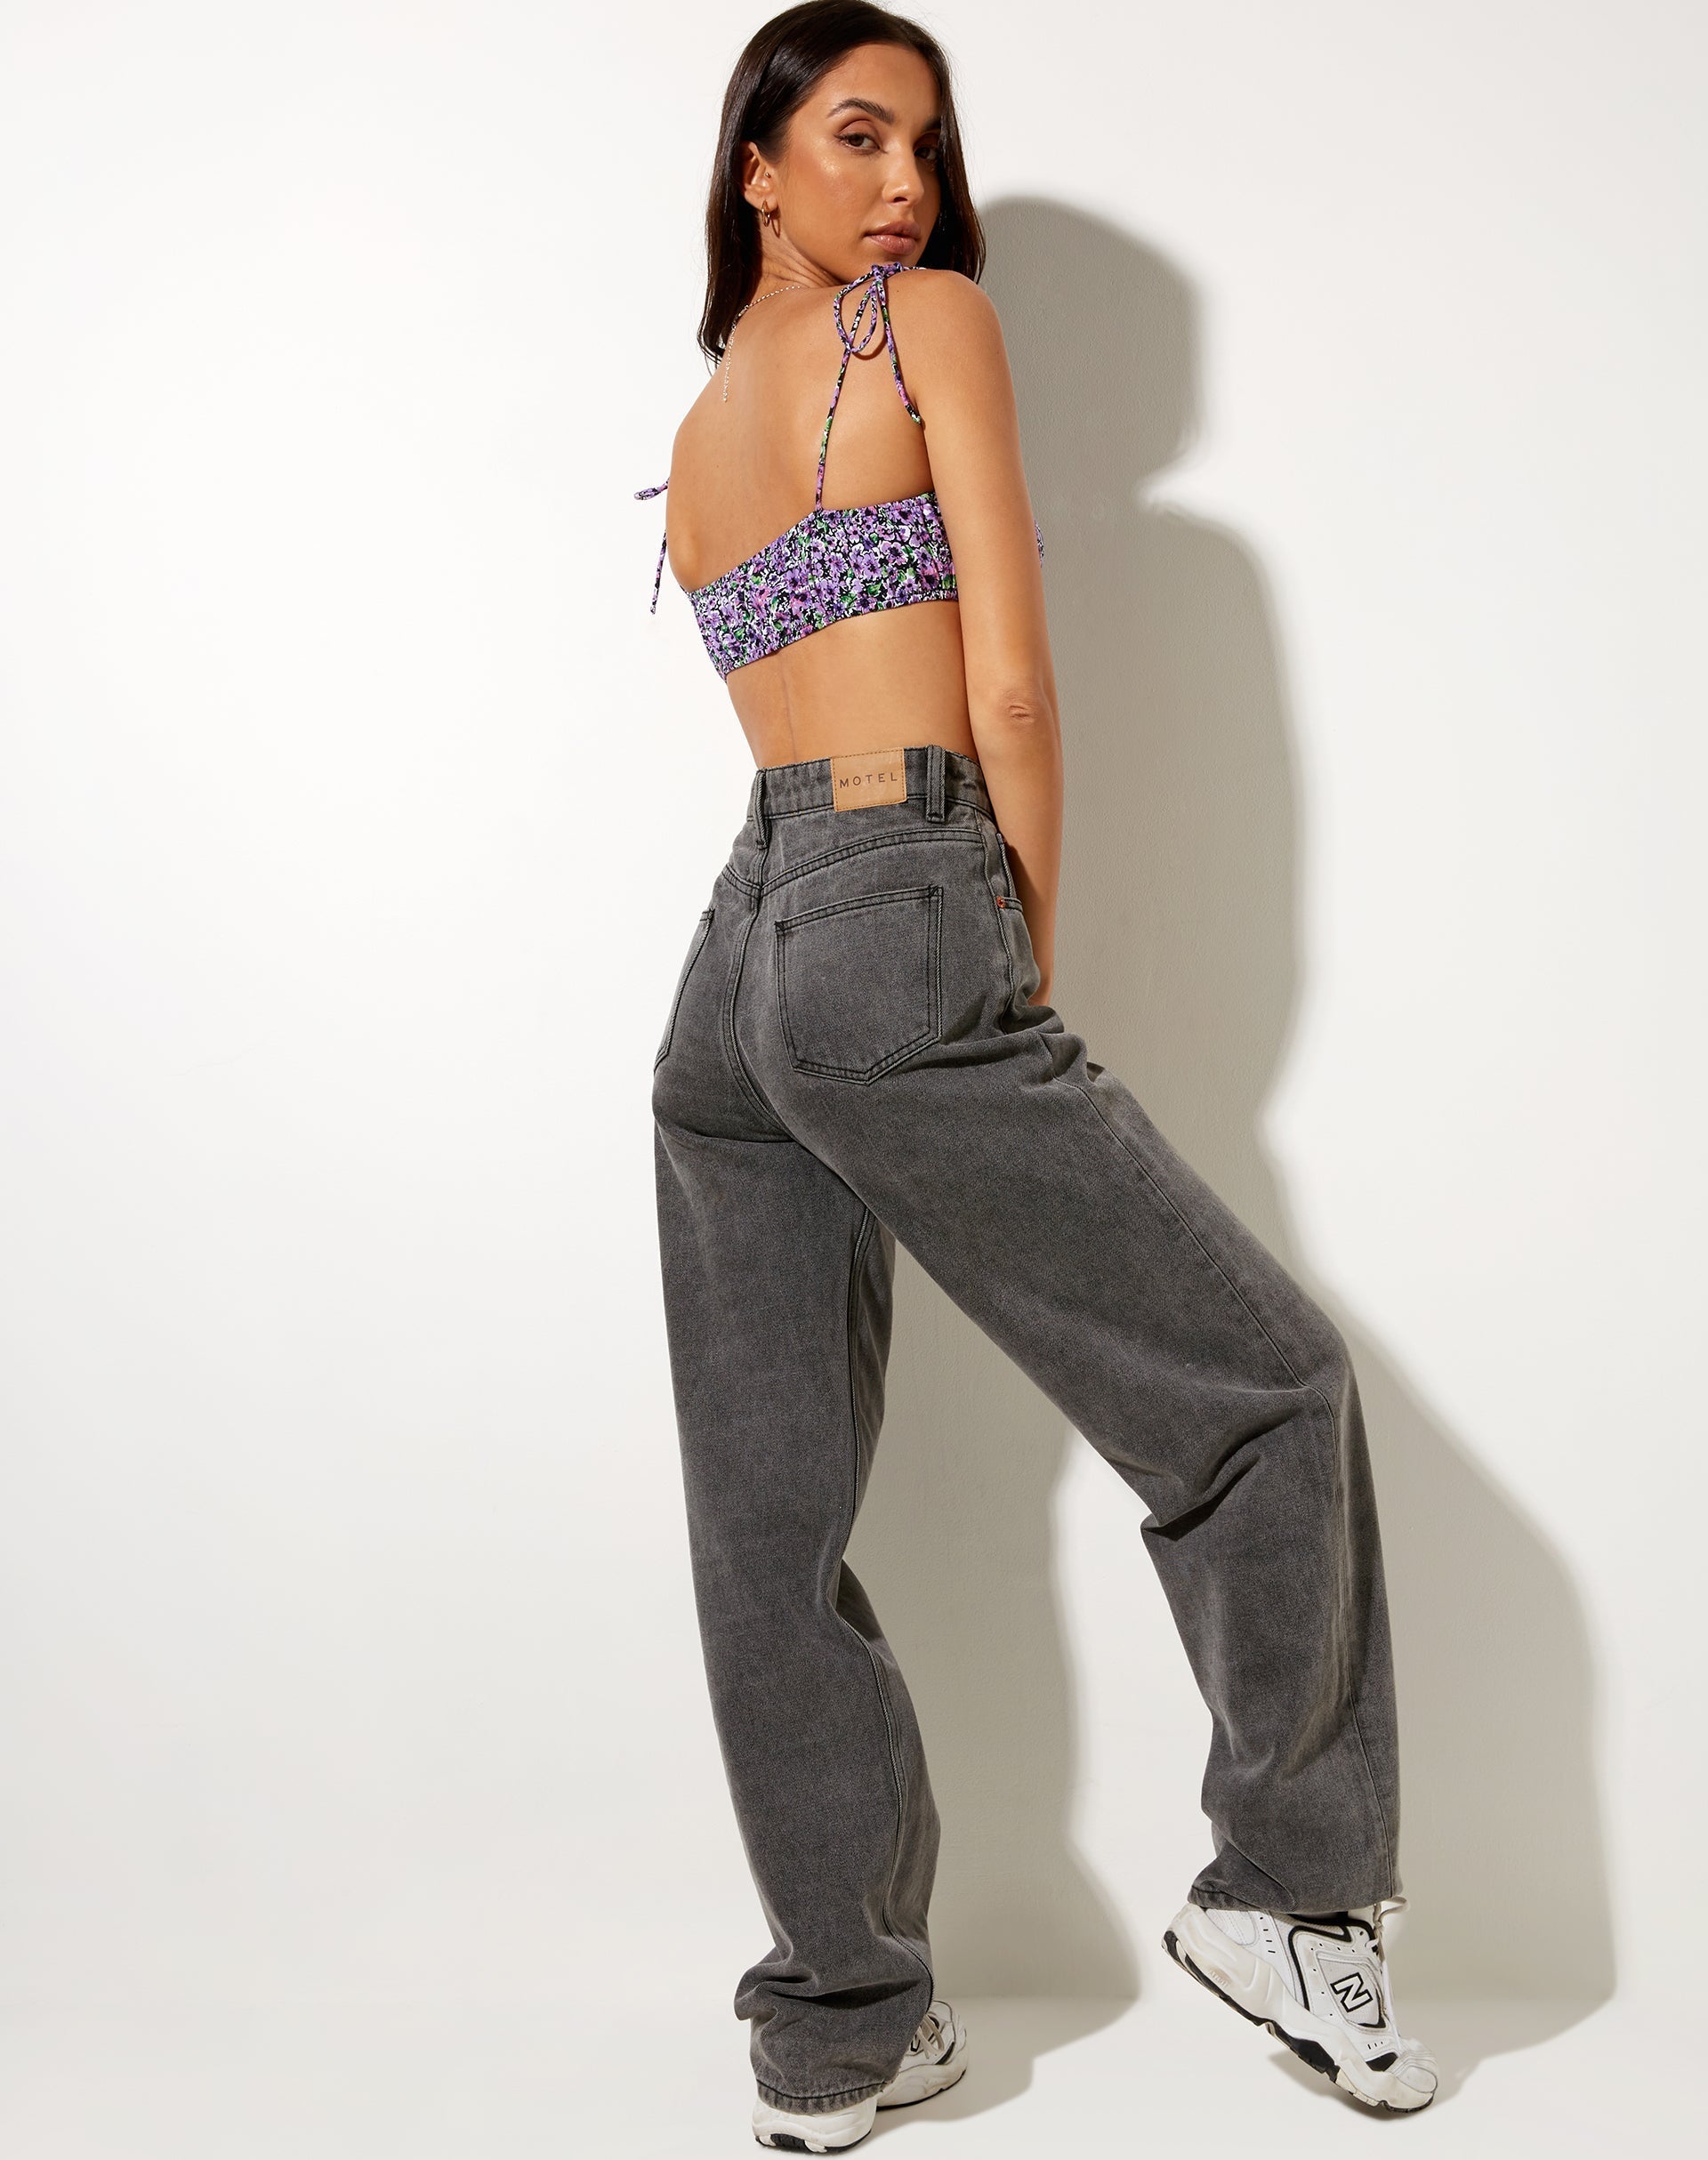 Hepsie Crop Top in Lilac Blossom